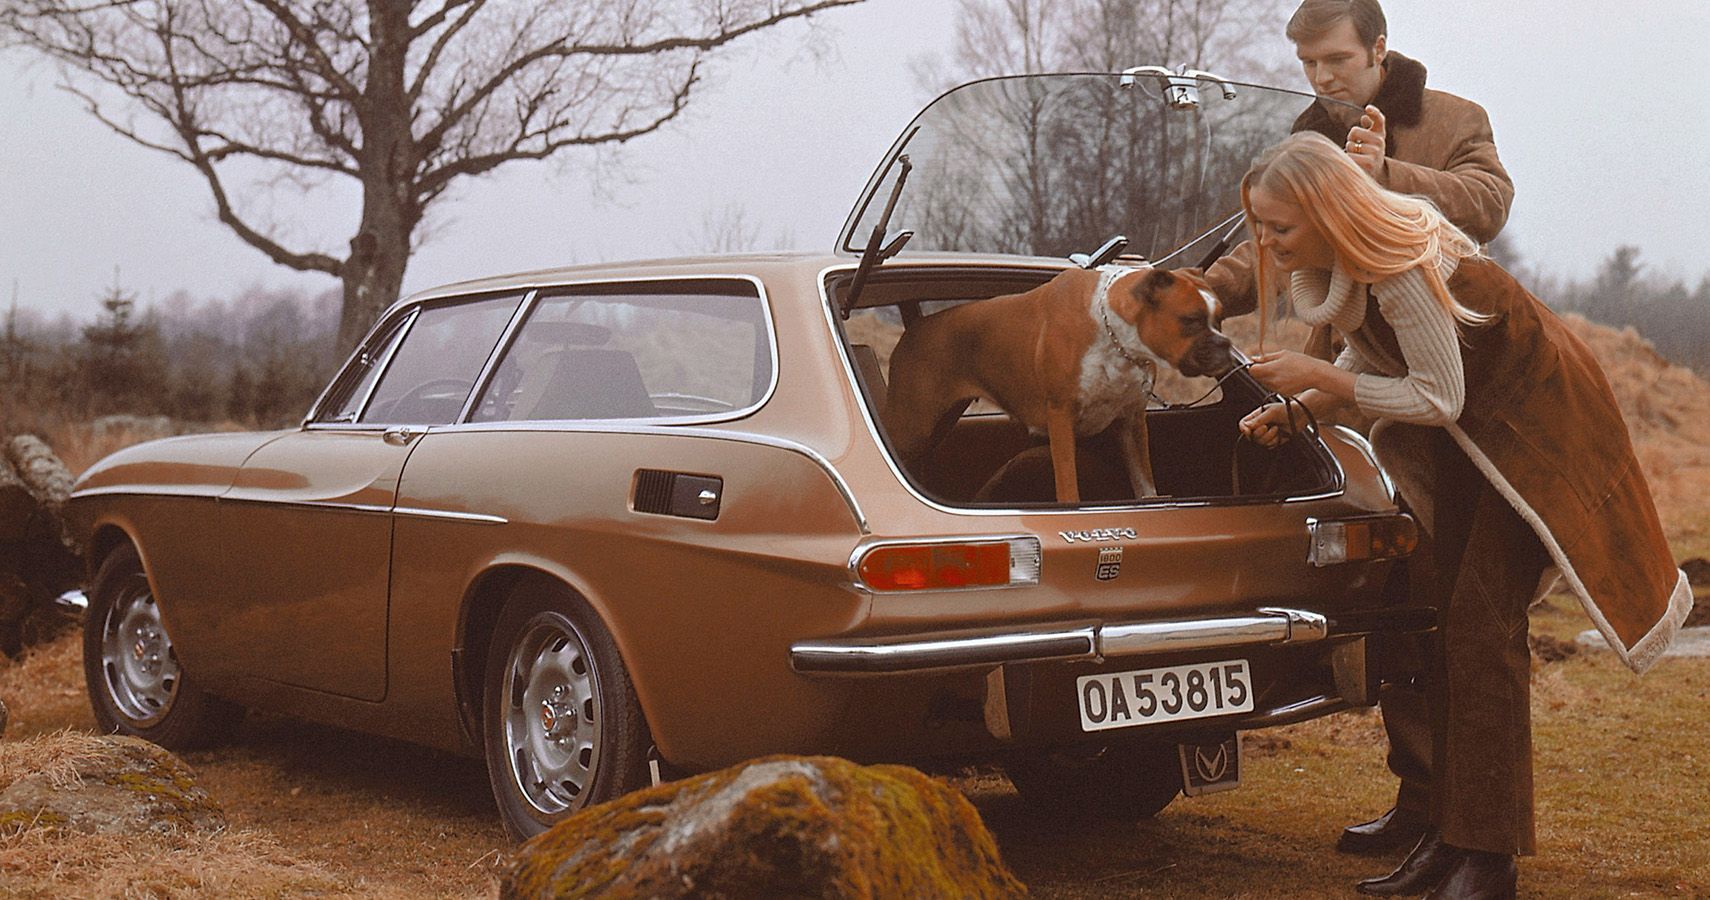 The Station Wagons, The Volvo P1800ES Might Be Slightly Lower On Power, But Still Carry Loads Of Appeal Because Of That Signature All-Glass Tailgate